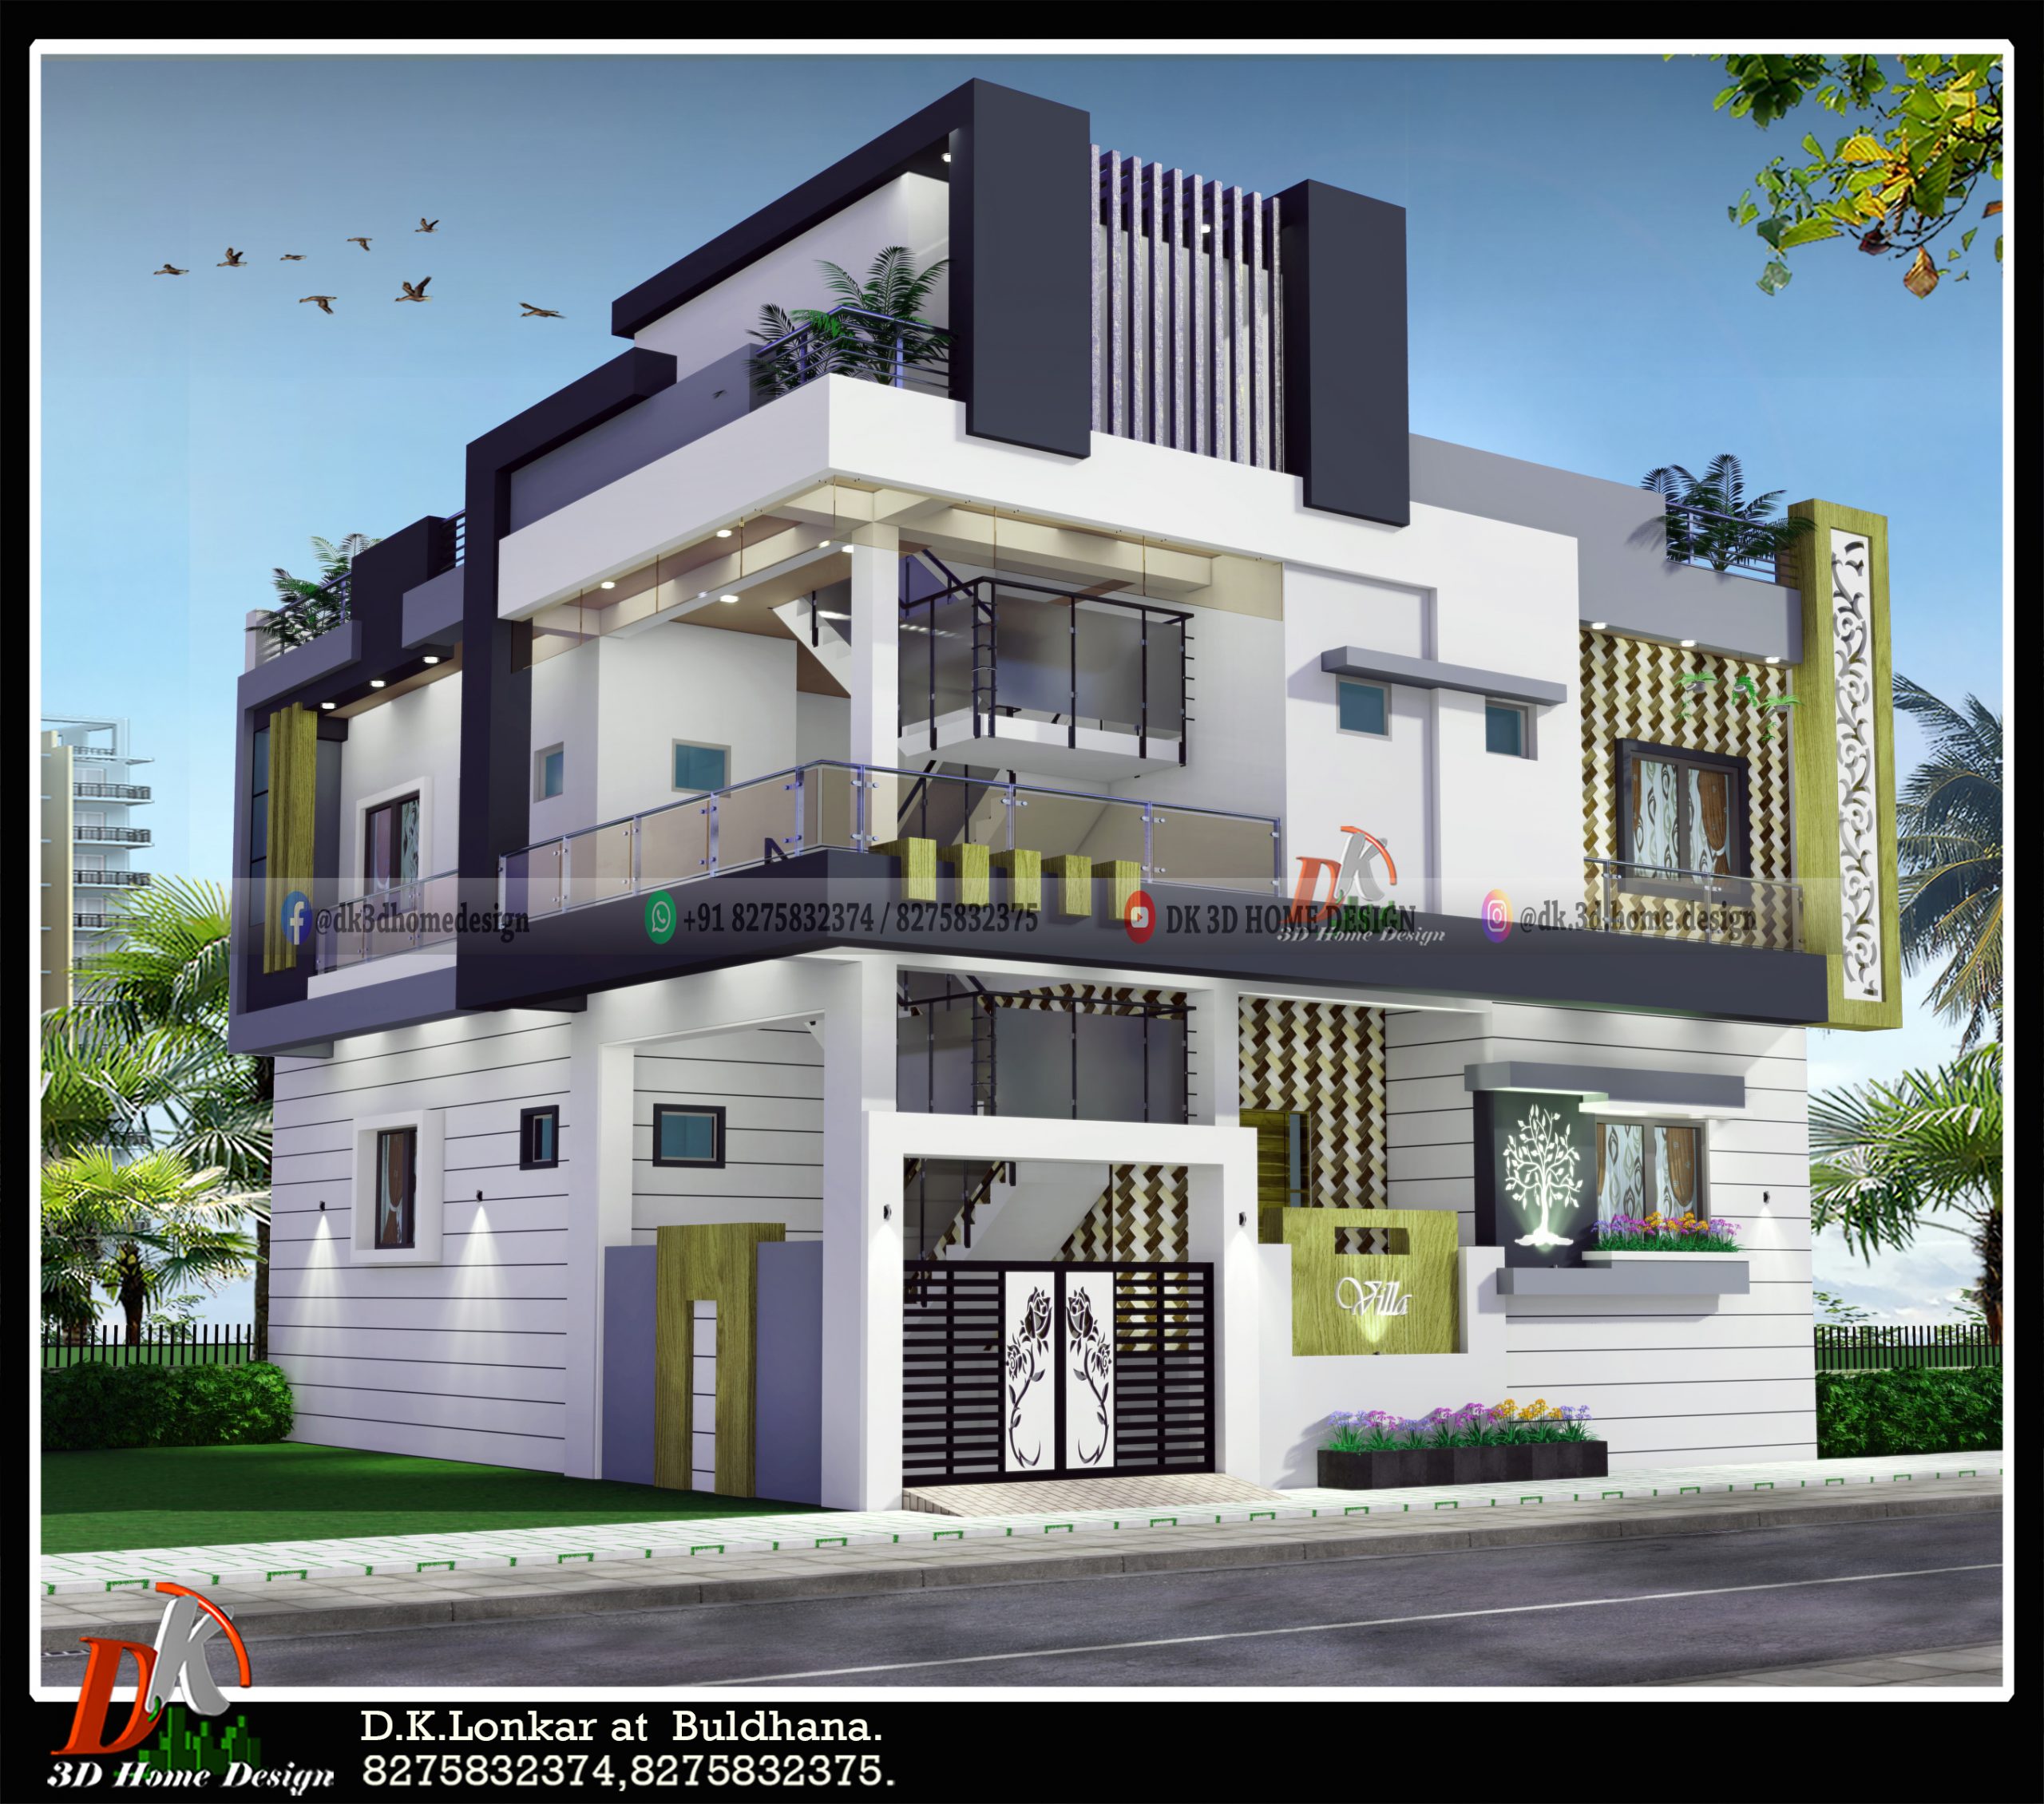 2 story house design in 1400 sq ft